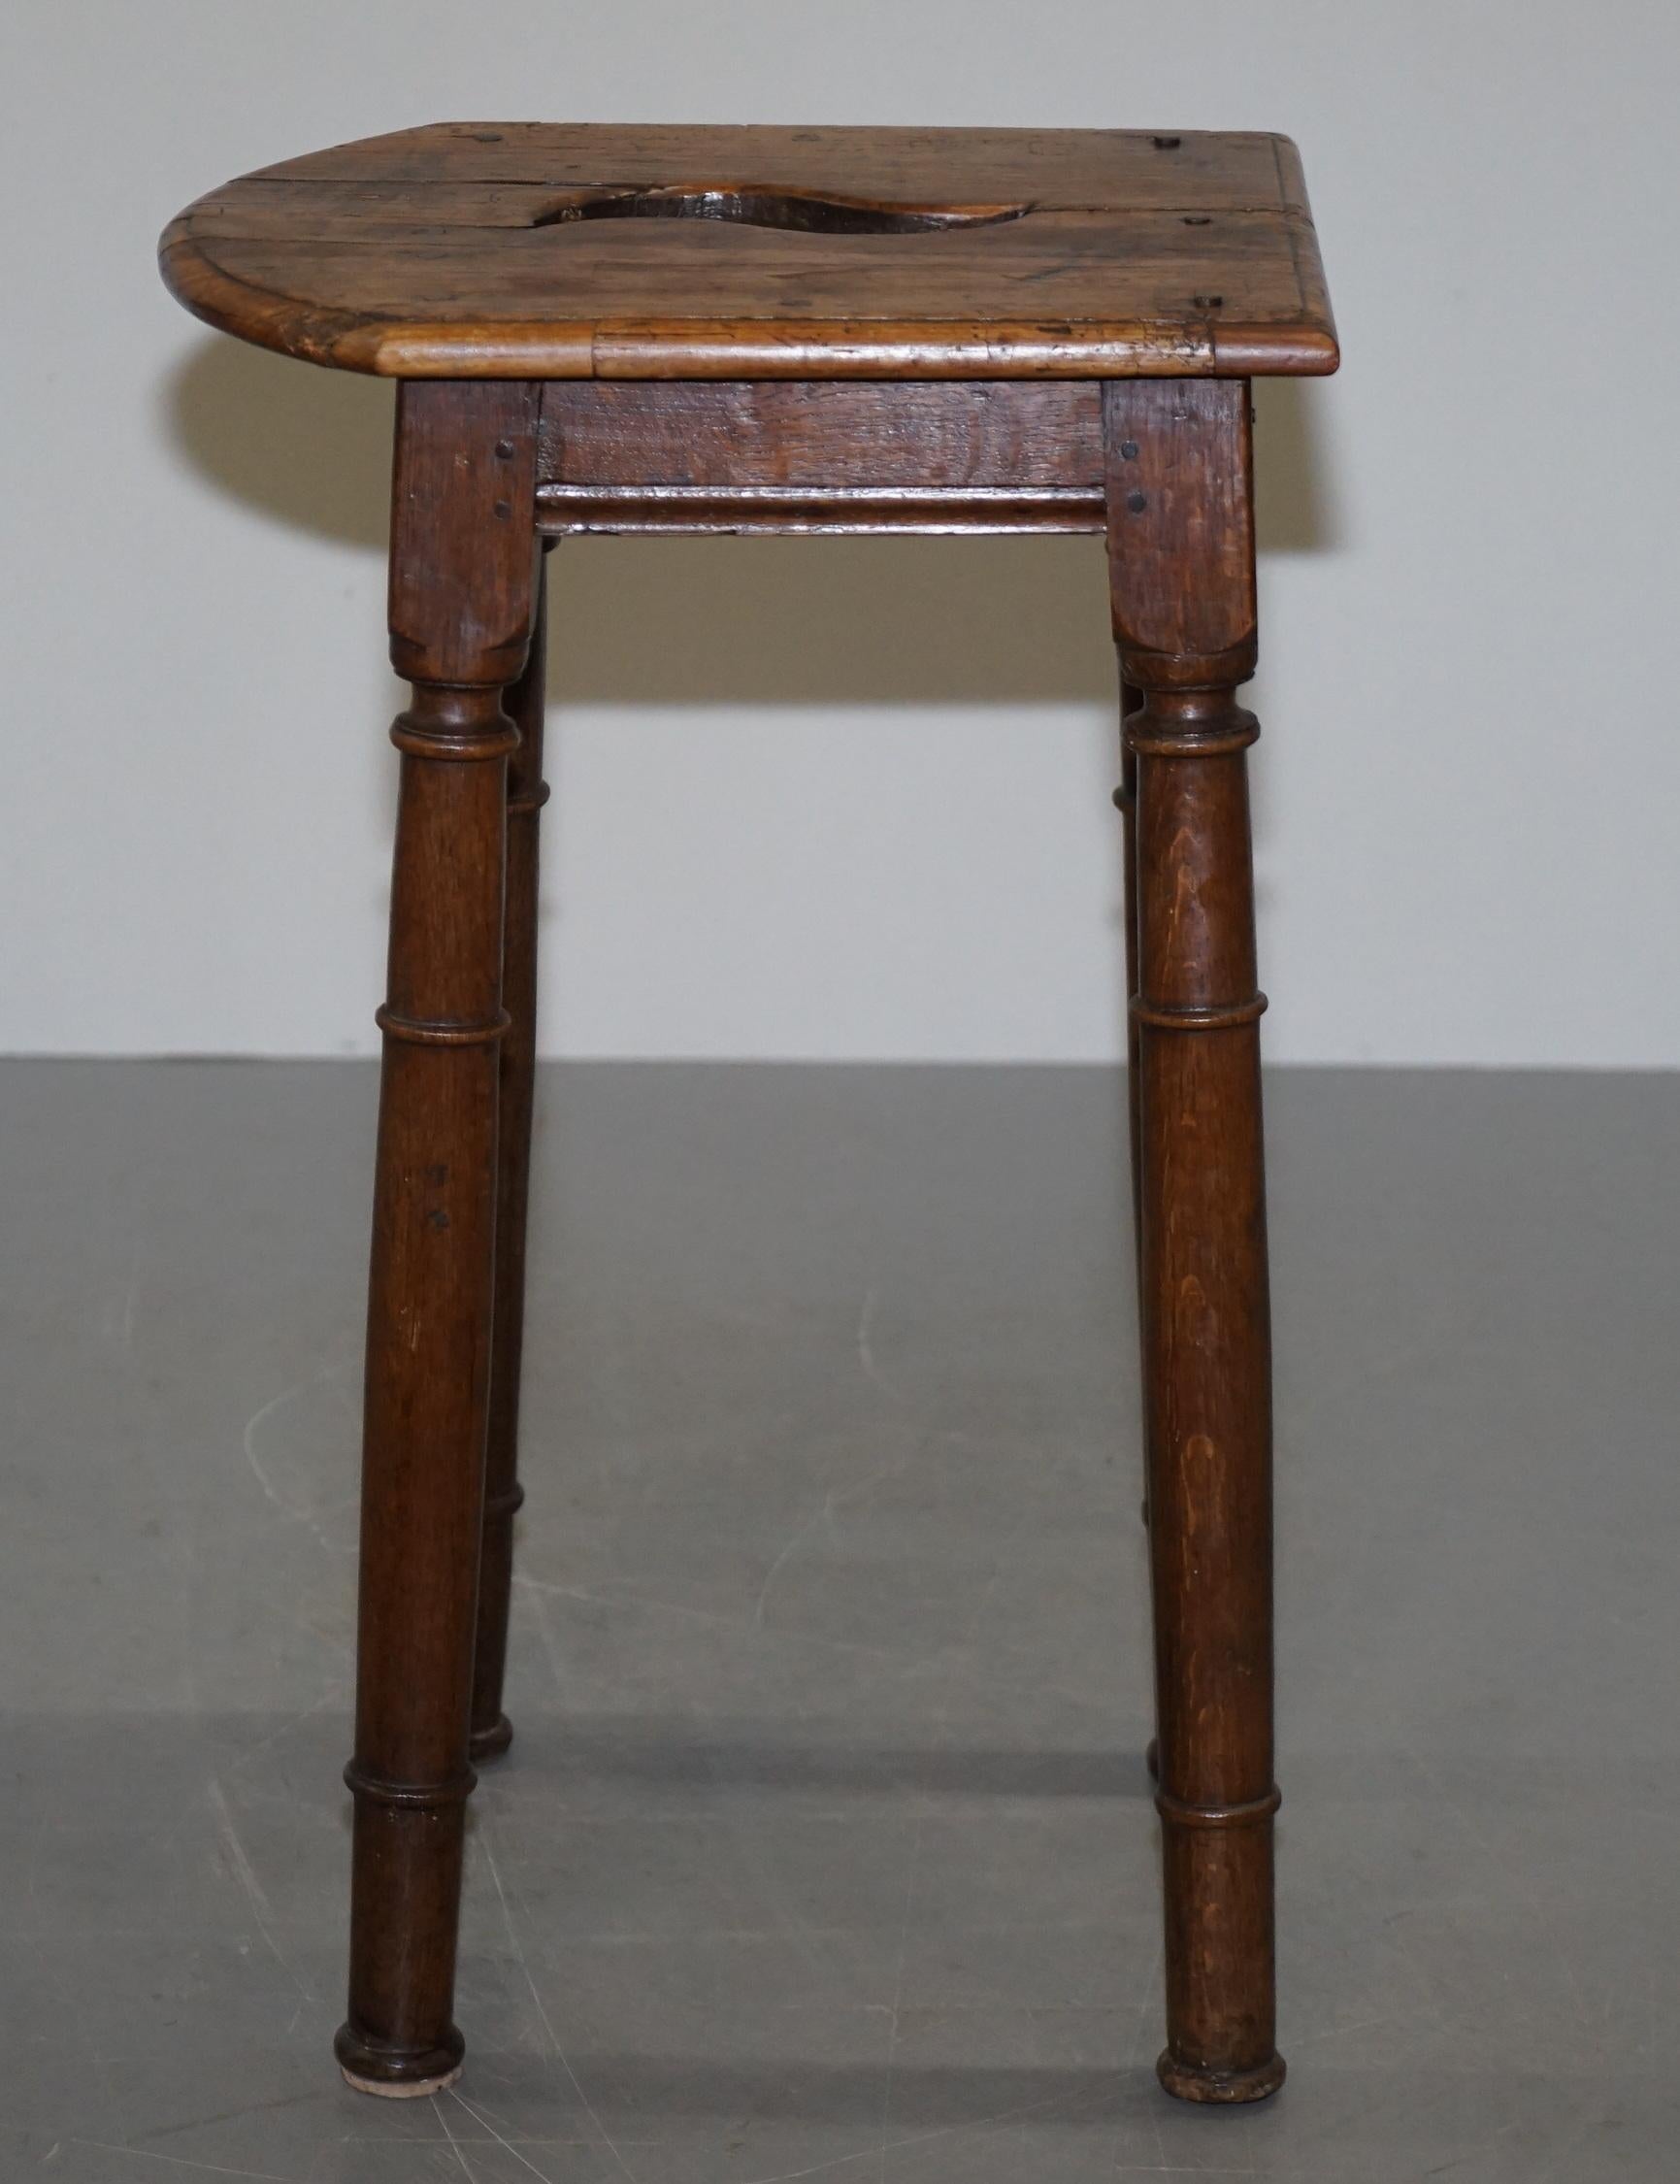 Lovely 18th Century Dutch Stool with Handle Cut Out in the Top Bar Pub Study 5